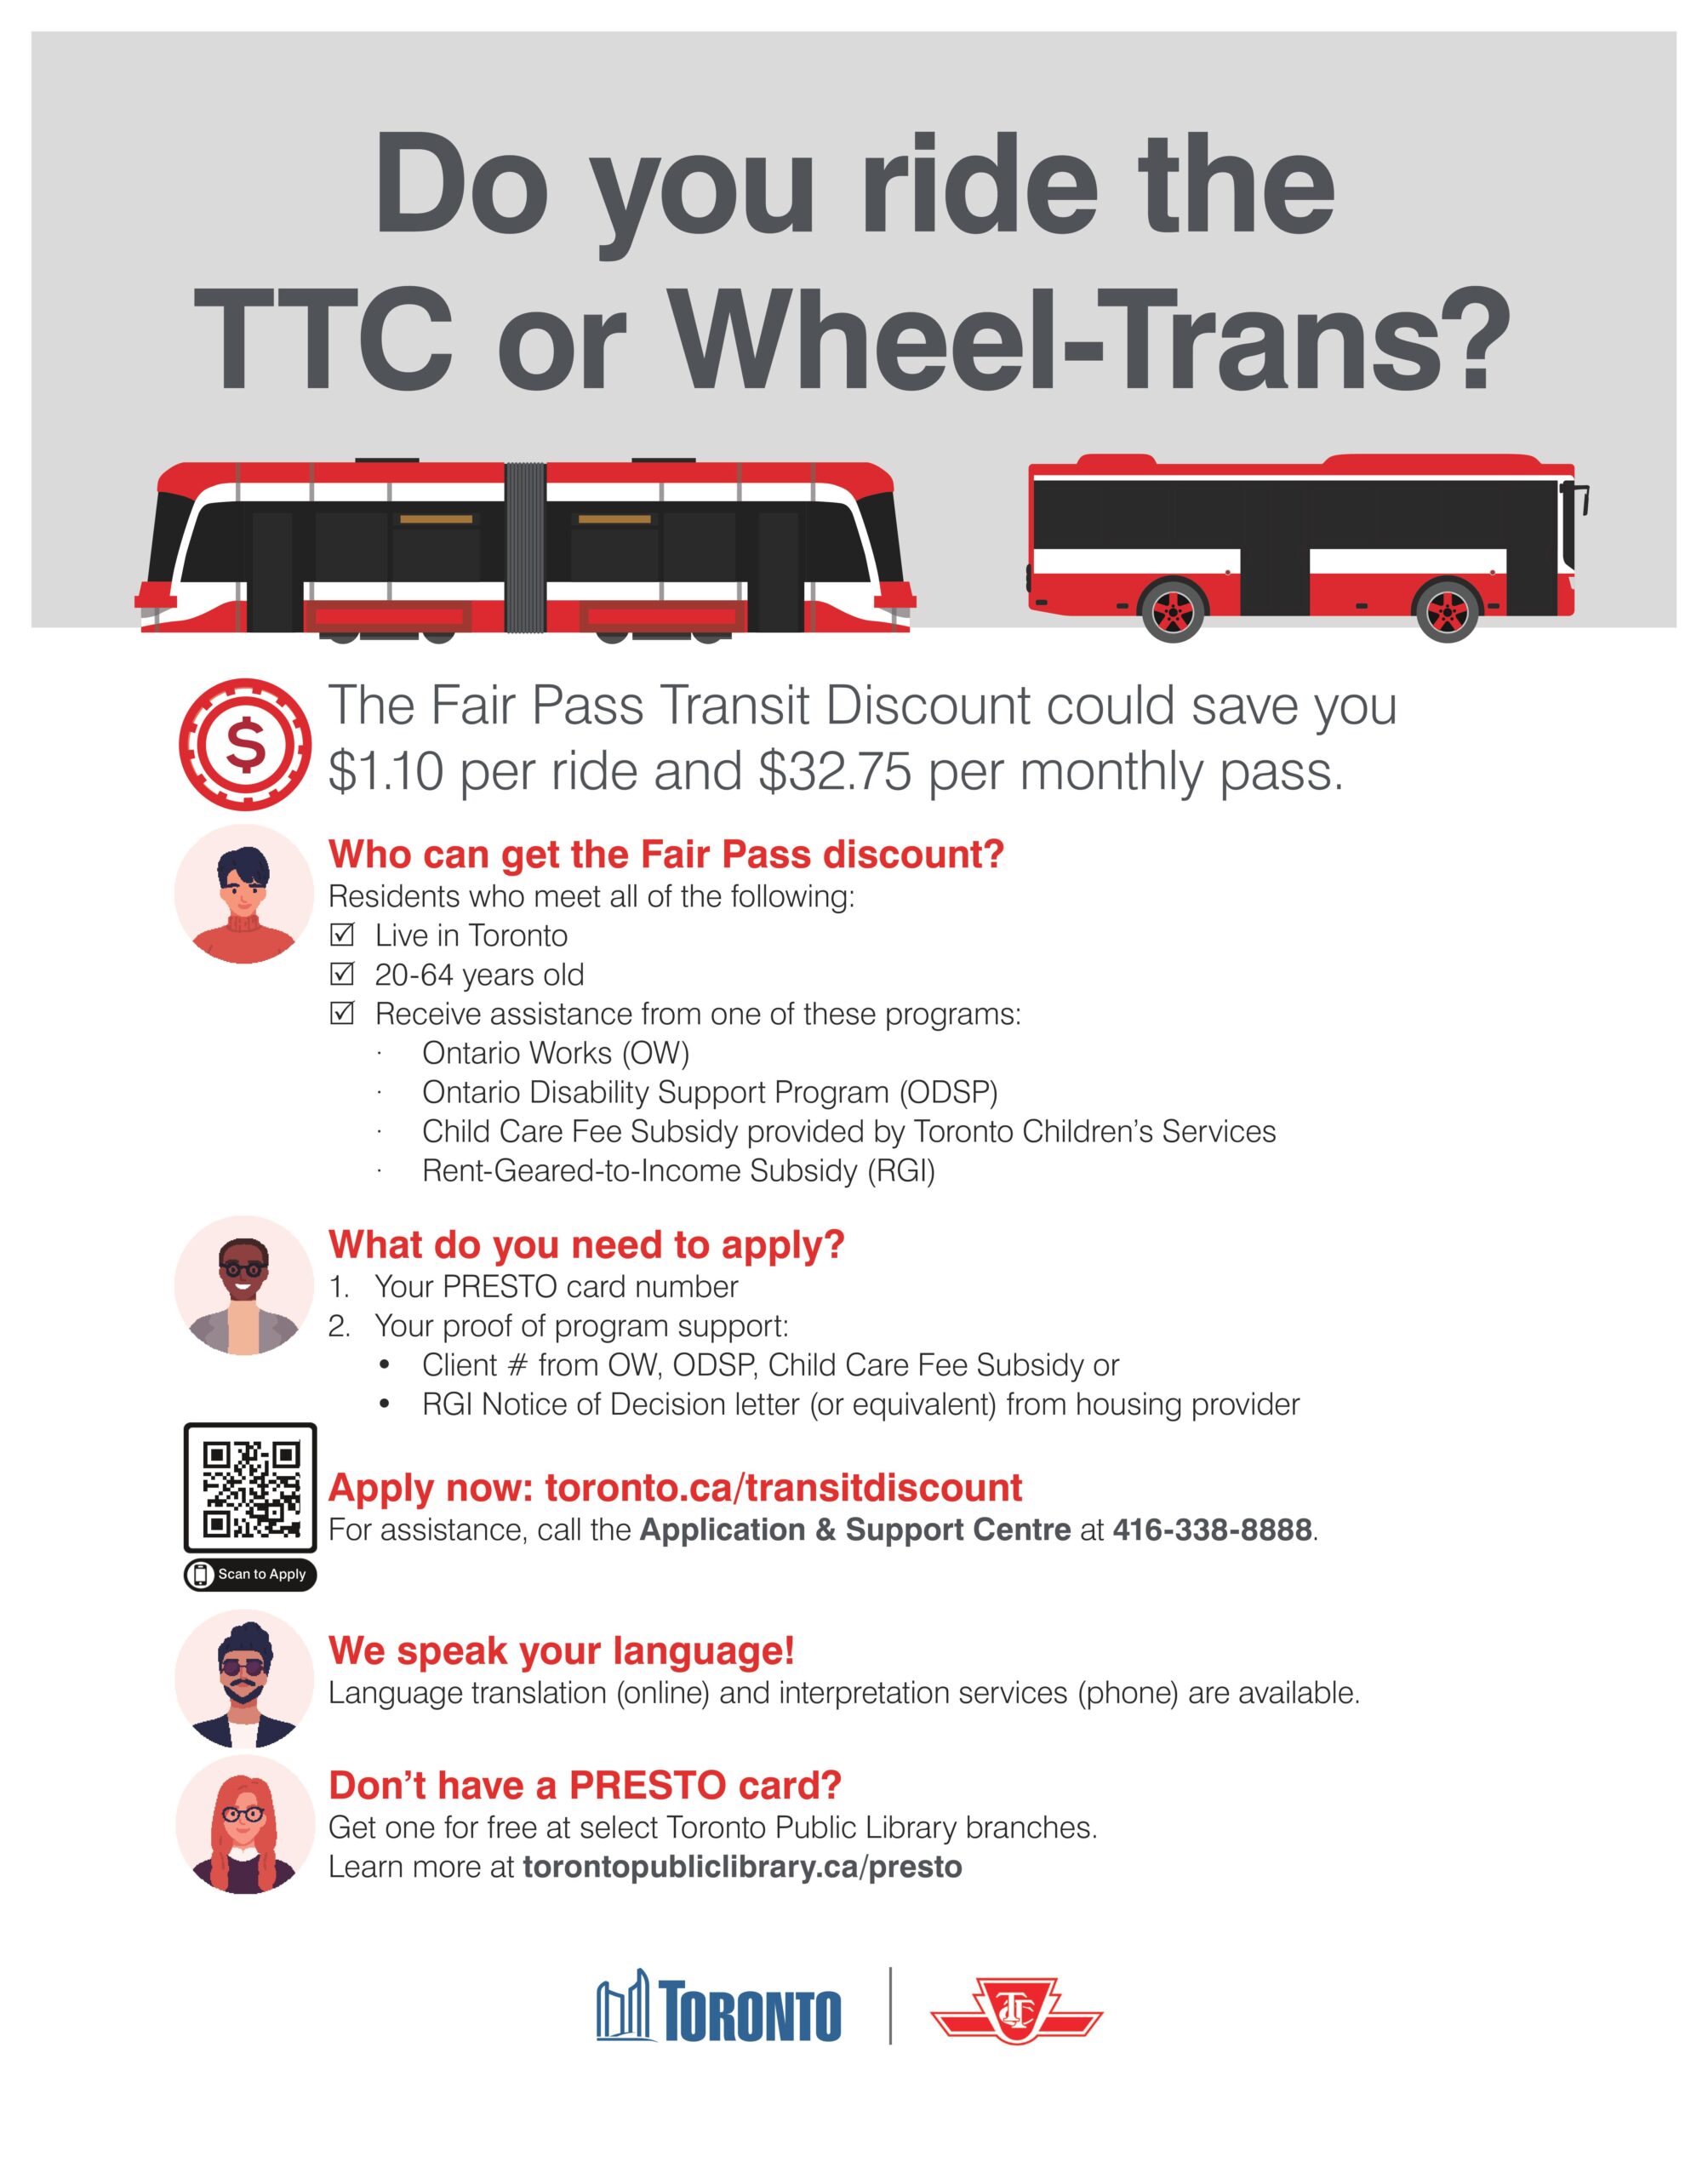 A poster that describes how people can save $1.10 per ride or $32.75 per monthly pass on the TTC or Wheel-Trans. The full text of this poster is on the webpage.